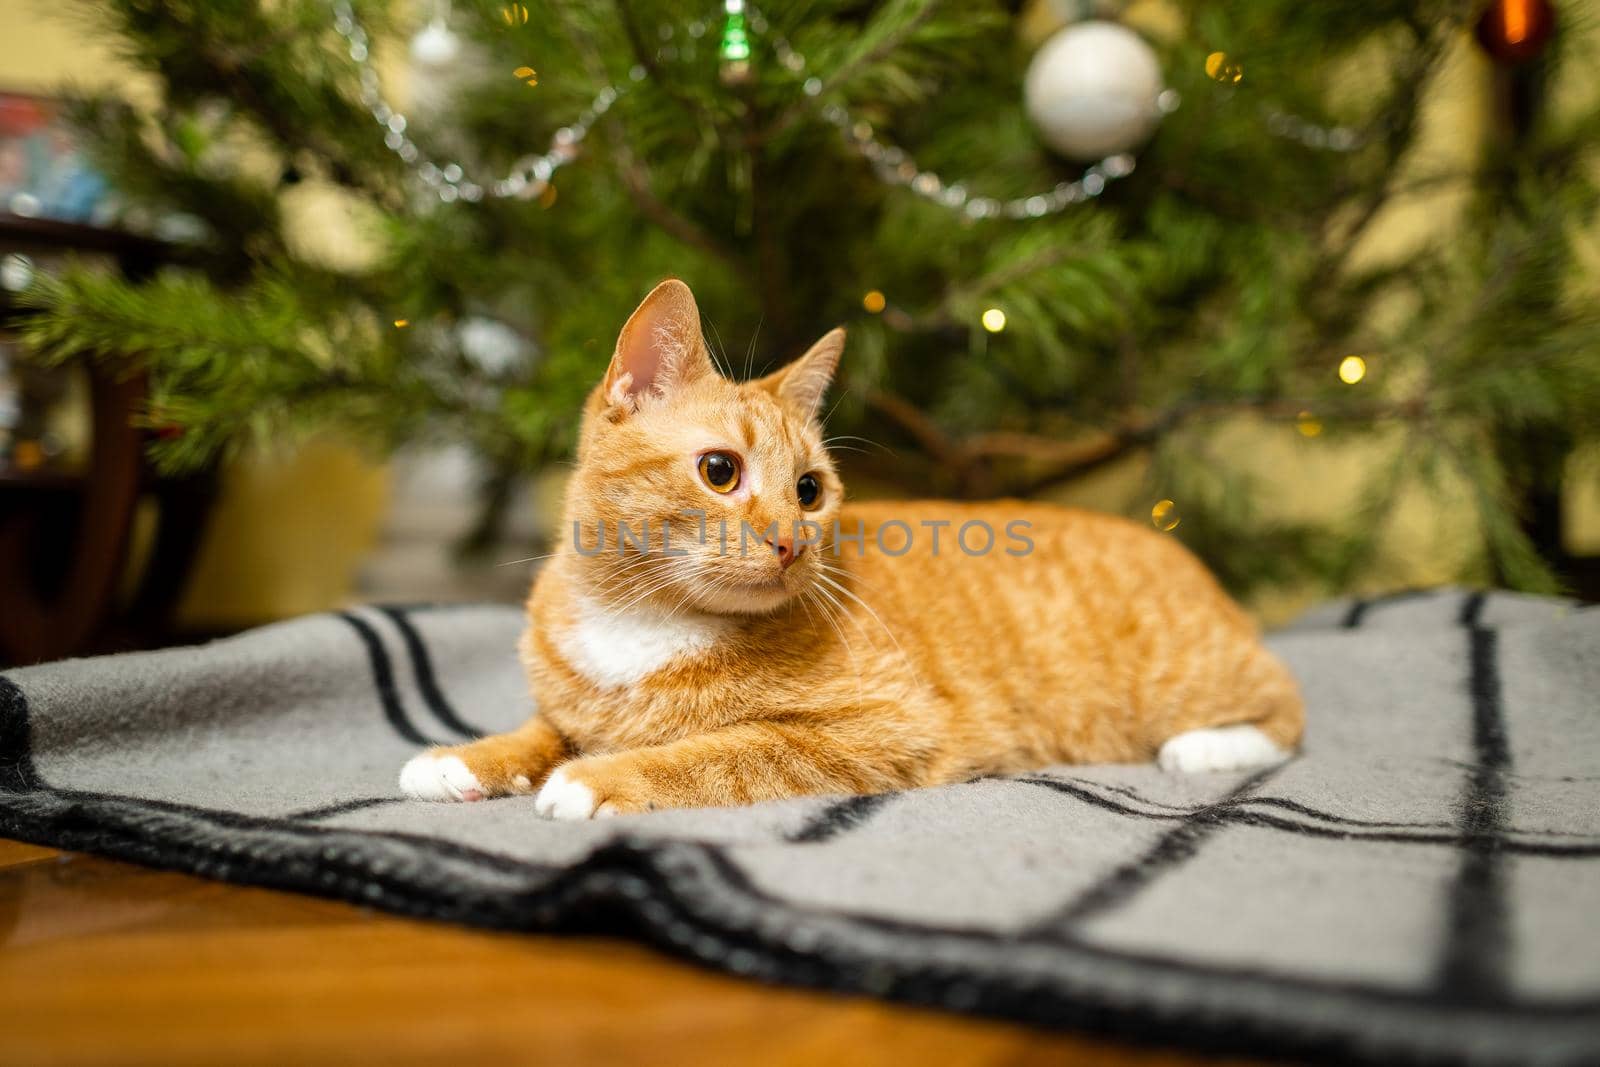 Ginger cat under Christmas tree. Christmas and New year concept. Funny pet under natural festive spruce and pine for New Year and Christmas eve. Cozy home with decorations for New Year celebration.